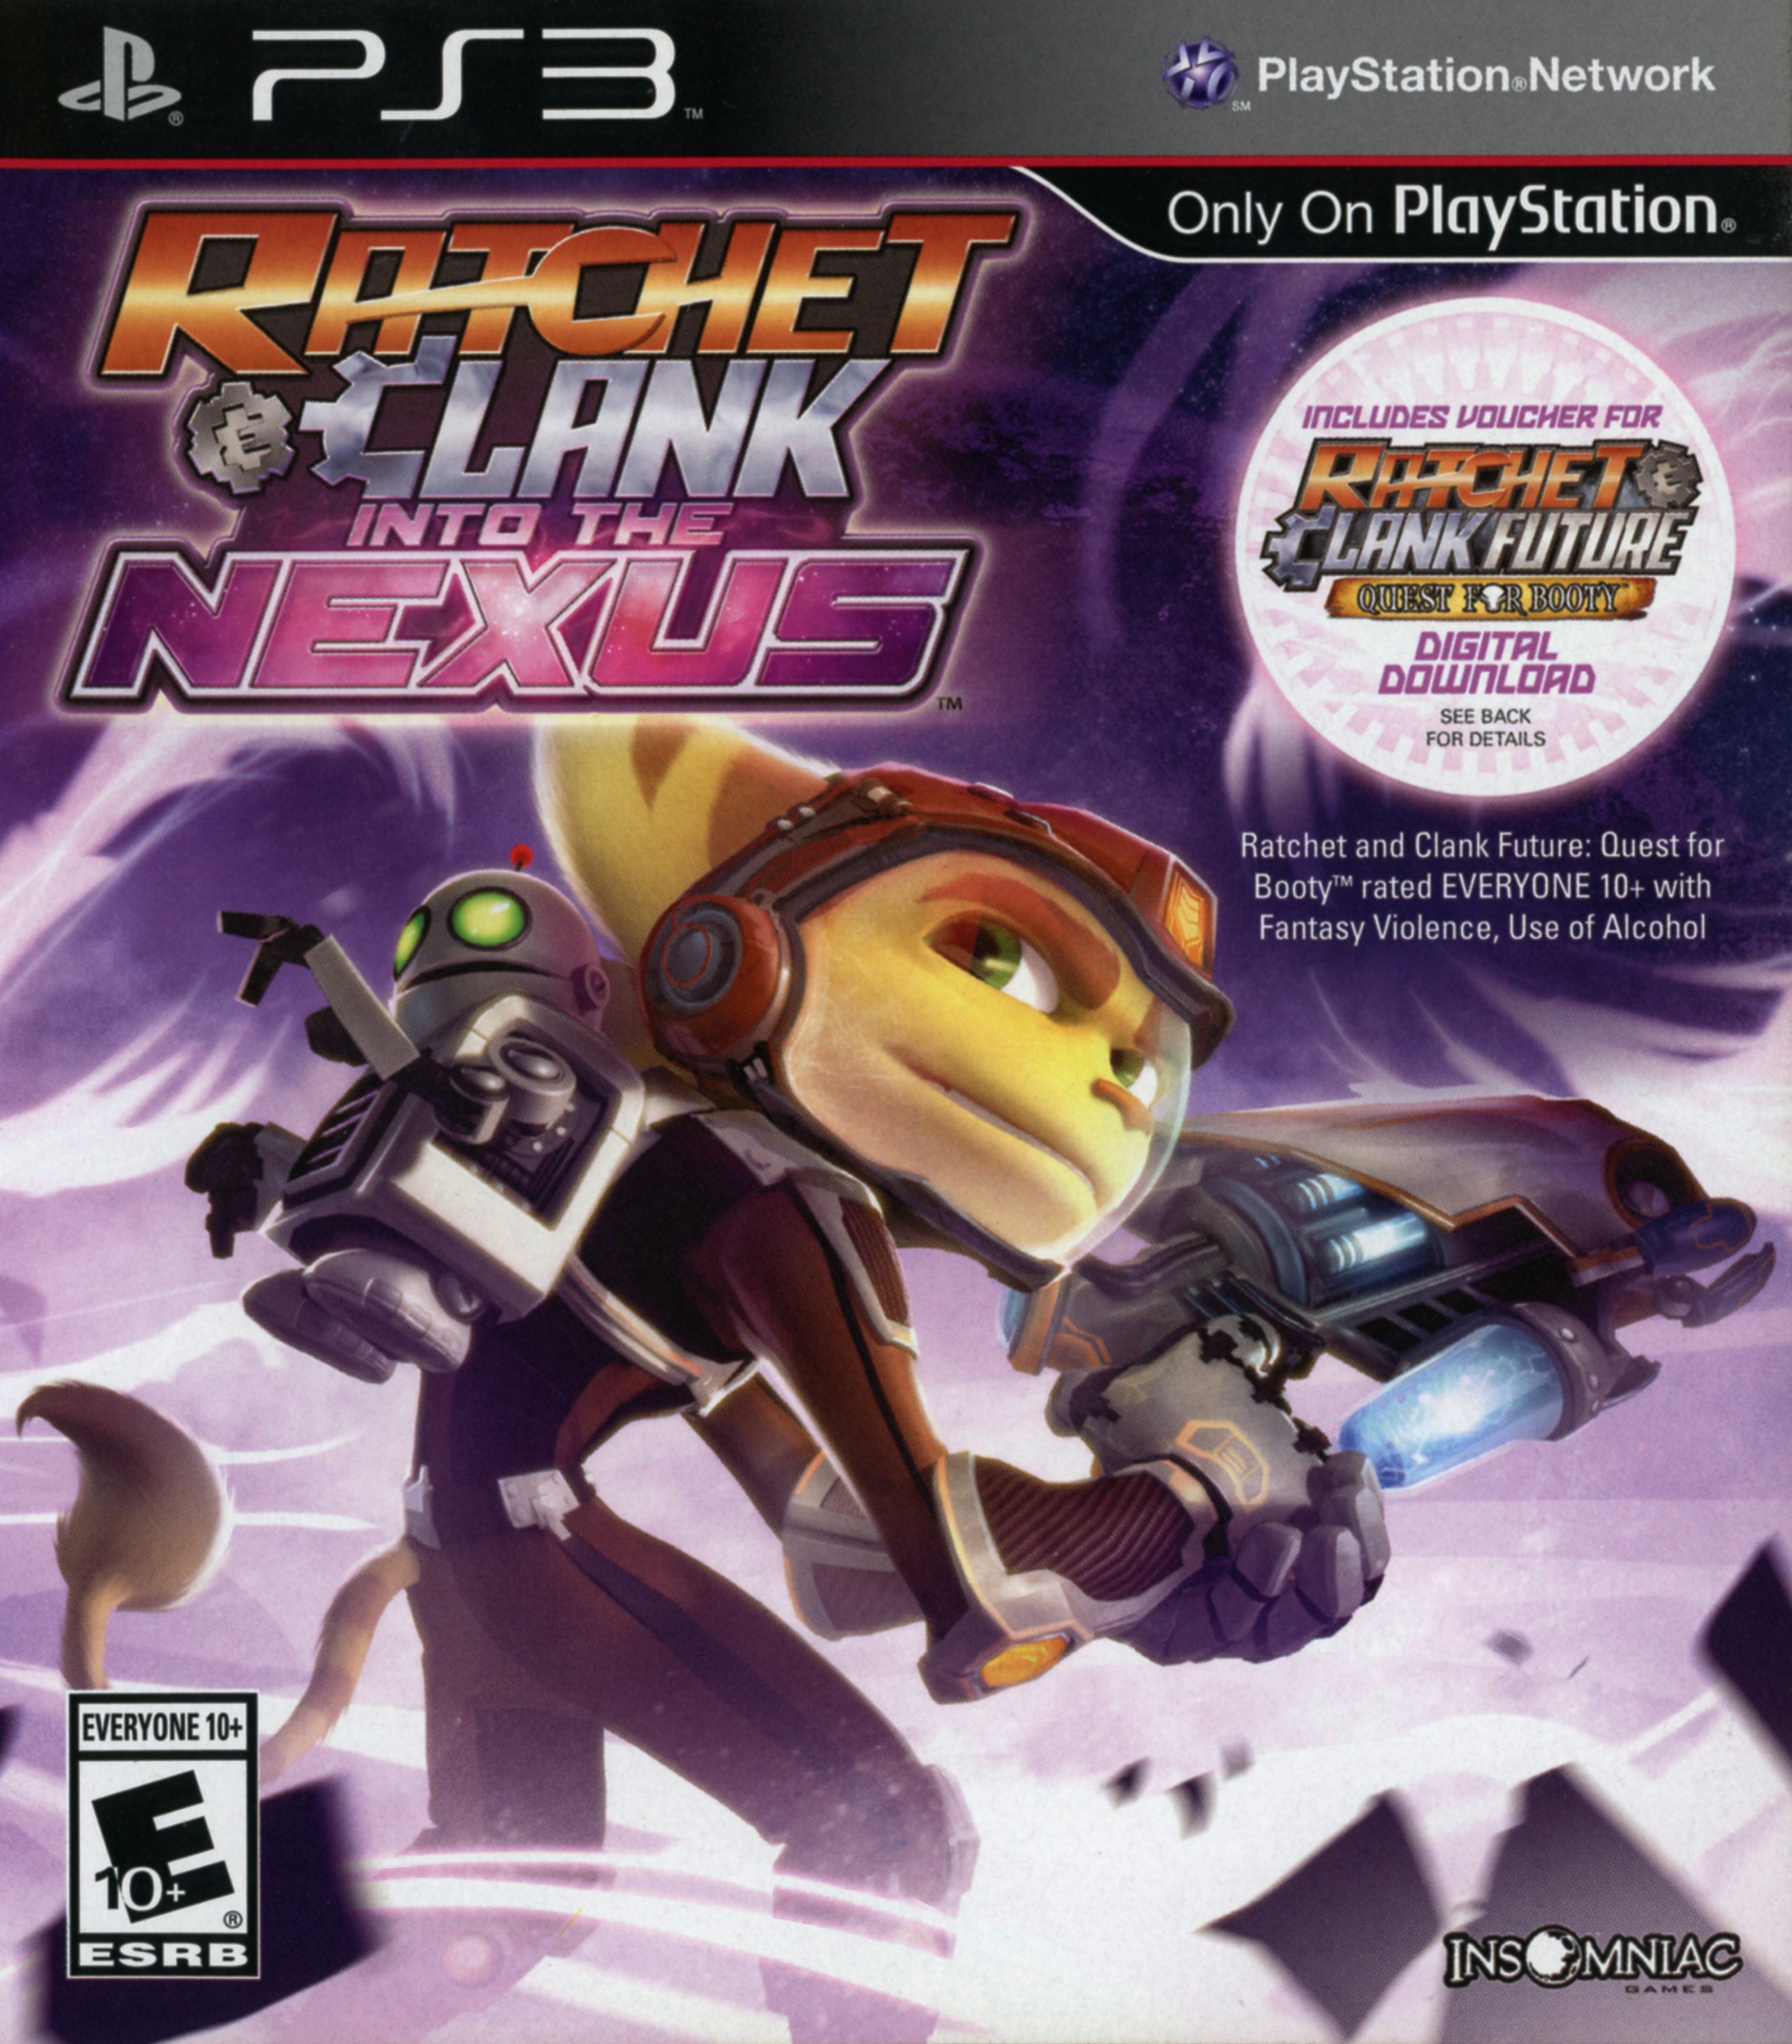 'Ratchet and Clank: into the Nexus'